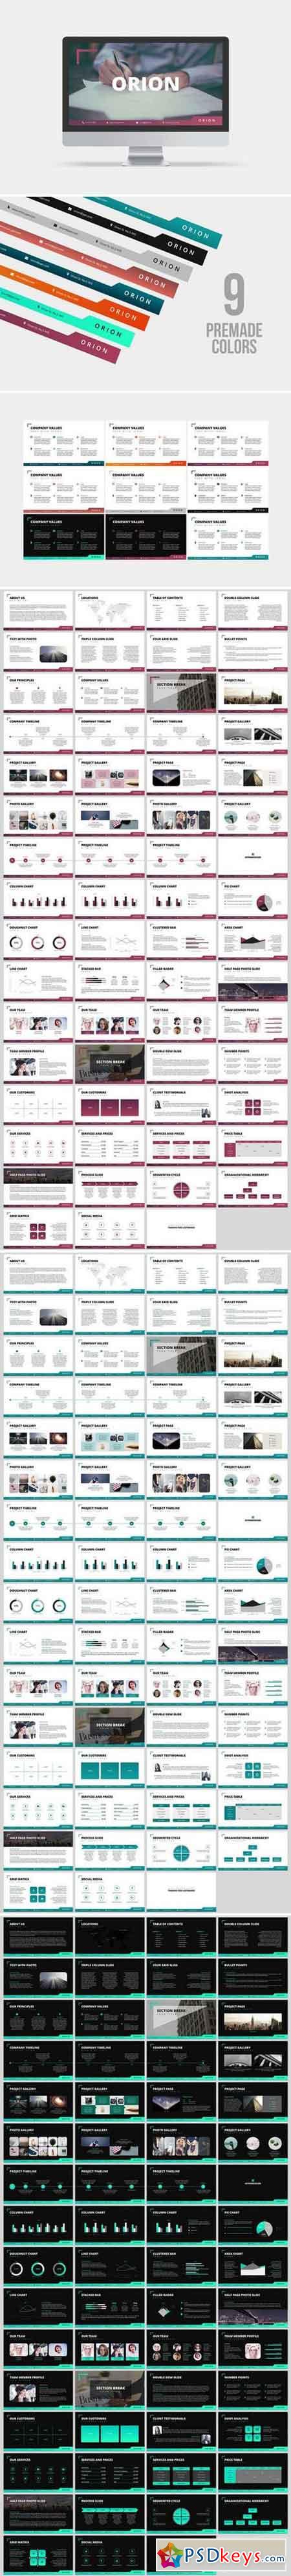 Orion PowerPoint Template 690692